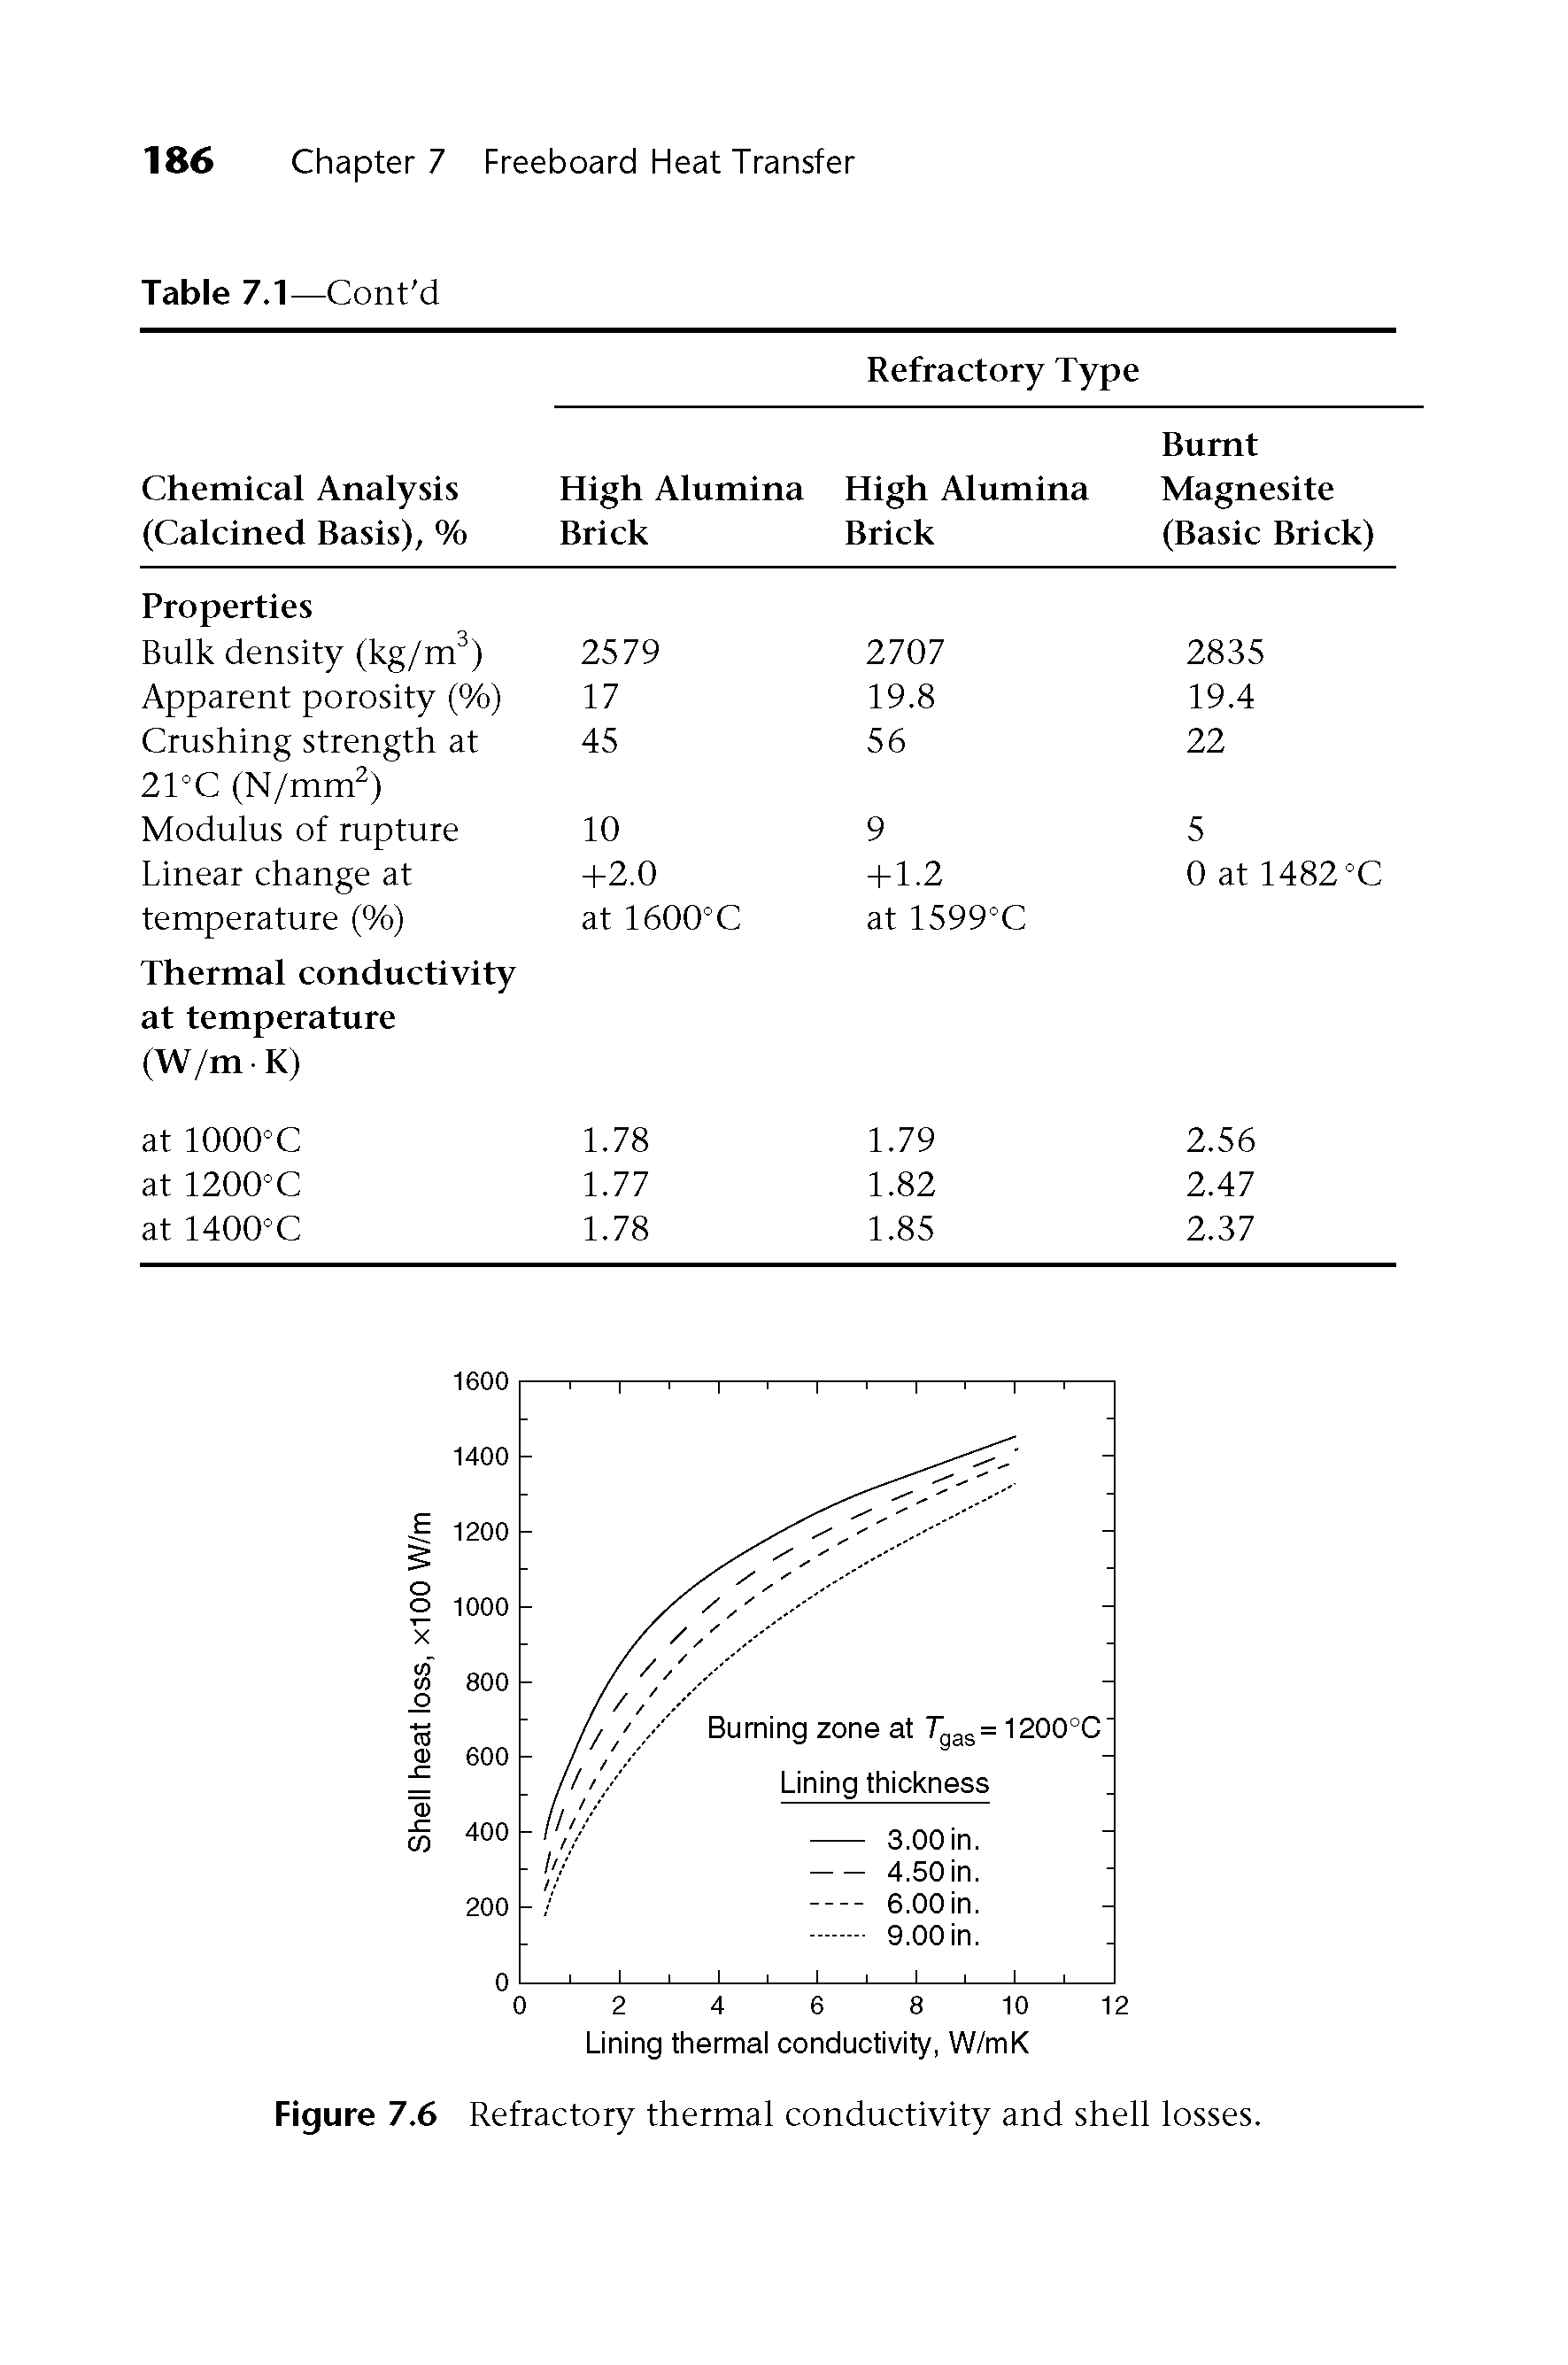 Figure 7.6 Refractory thermal conductivity and shell losses.